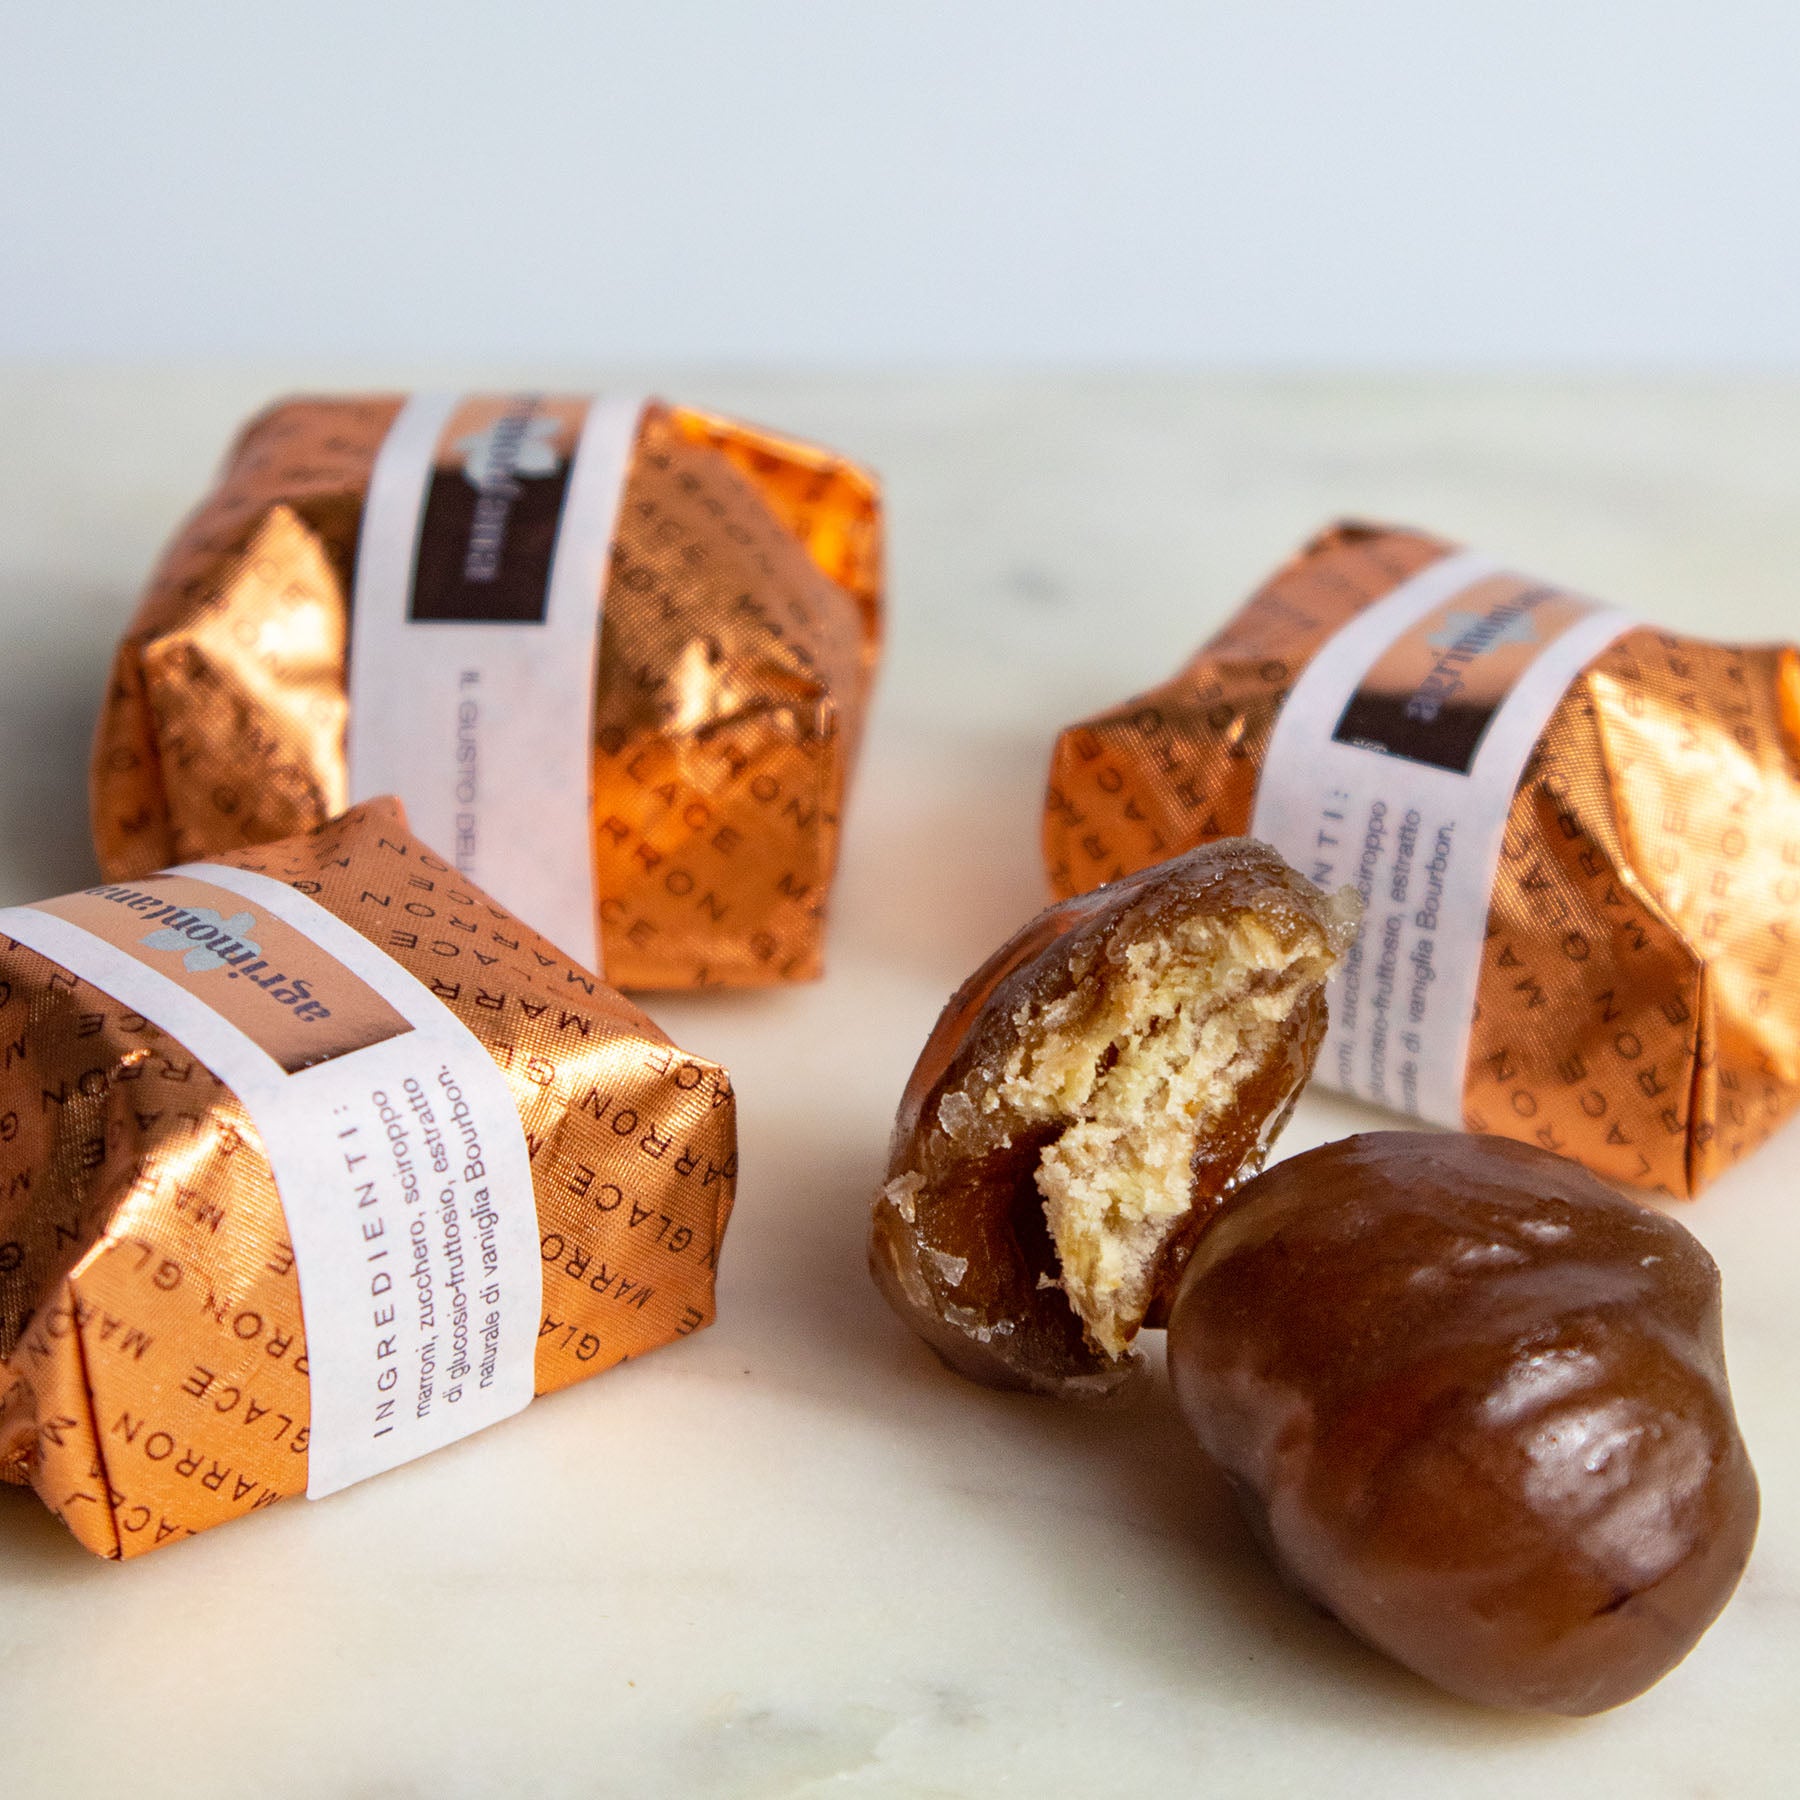 Agrimontana Candied Chestnuts Valle Susa IGP Marrons Glacés